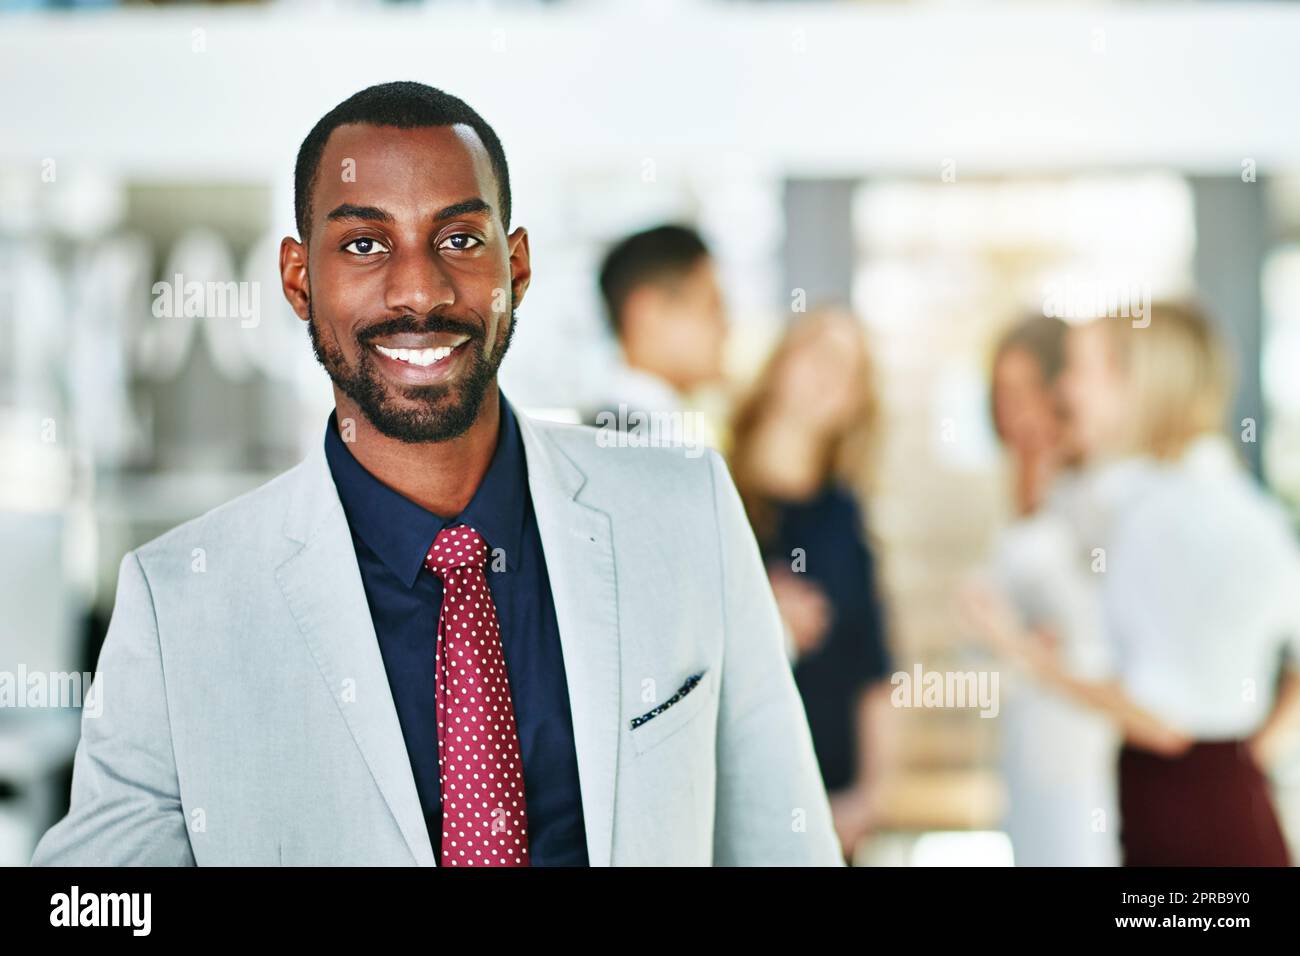 Manager, leader and boss standing with diverse team of executives in office background. Portrait of confident, successful or proud ceo with happy, smiling and cheerful face expression after a meeting Stock Photo